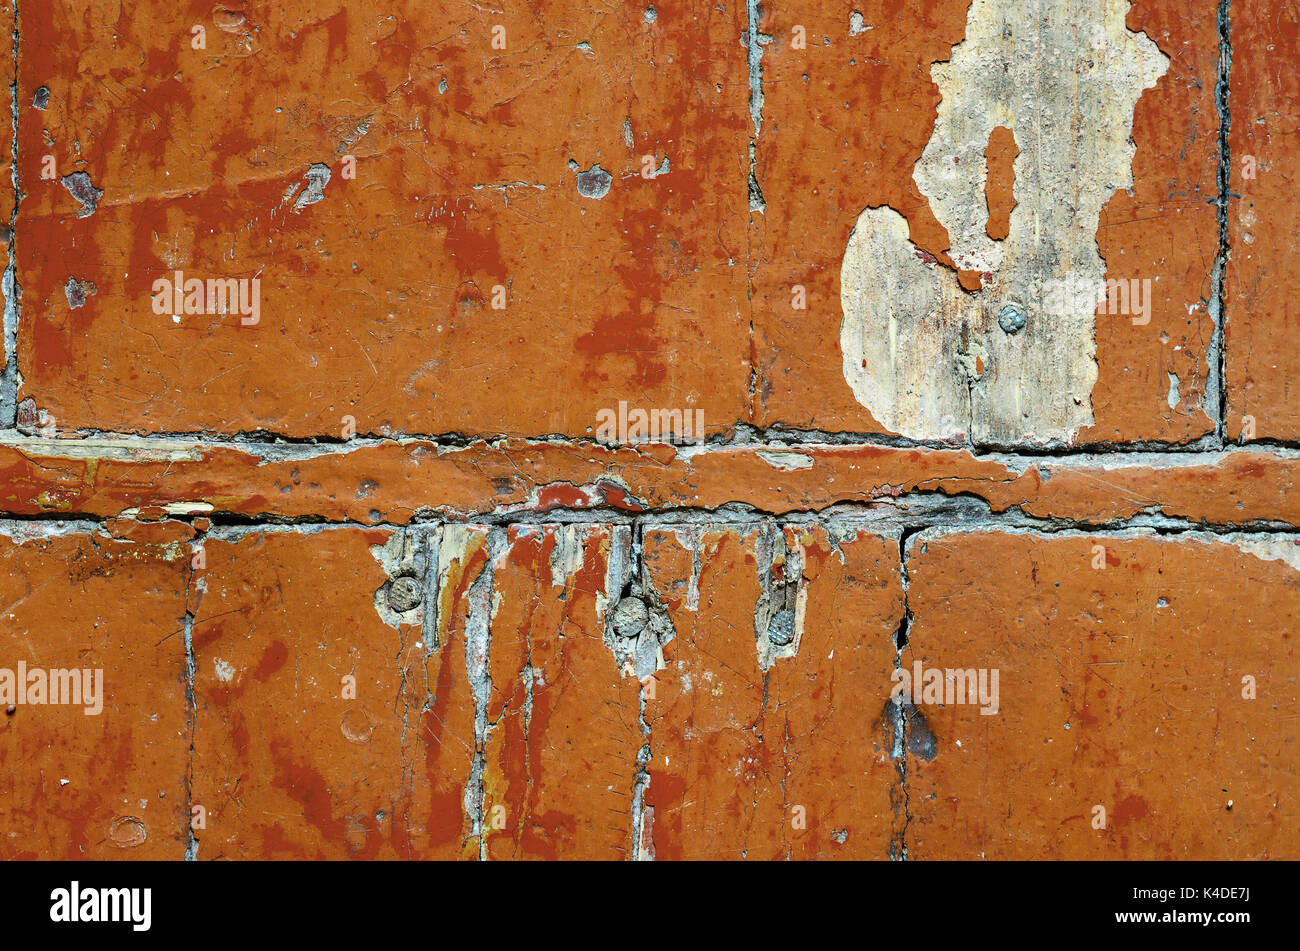 Texture of old dilapidated wooden floor with brown peeling paint. Exfoliated Paint on an Old Wooden Floor. Shabby Background Stock Photo